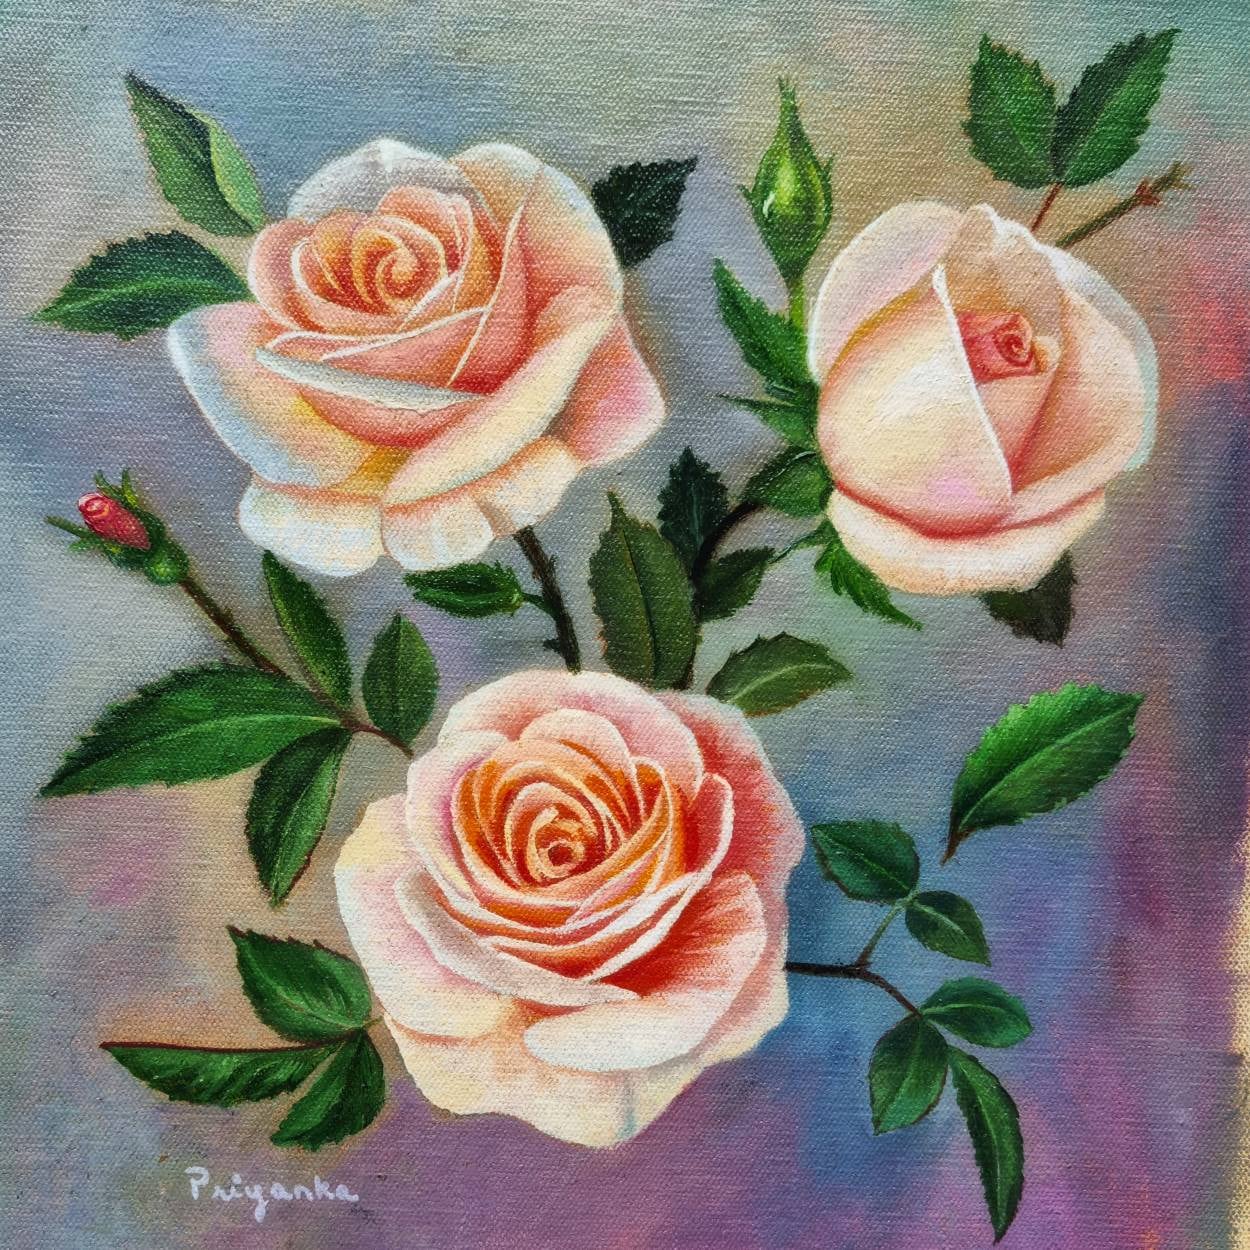 Buy Rose Painting Online In India - Etsy India